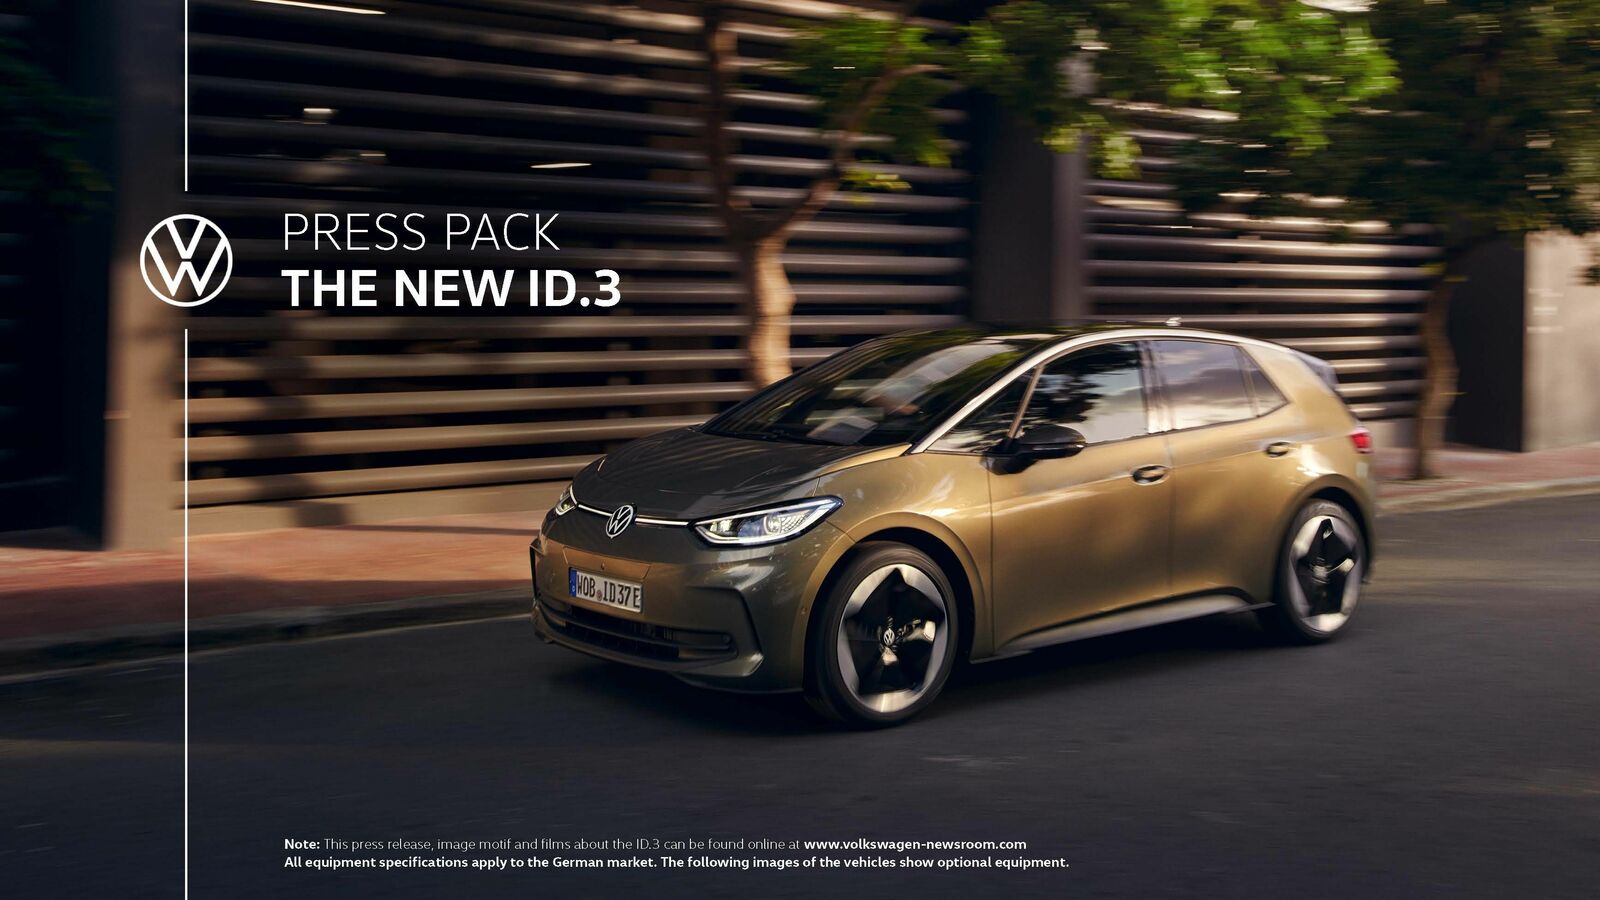 Press pack: The new ID3